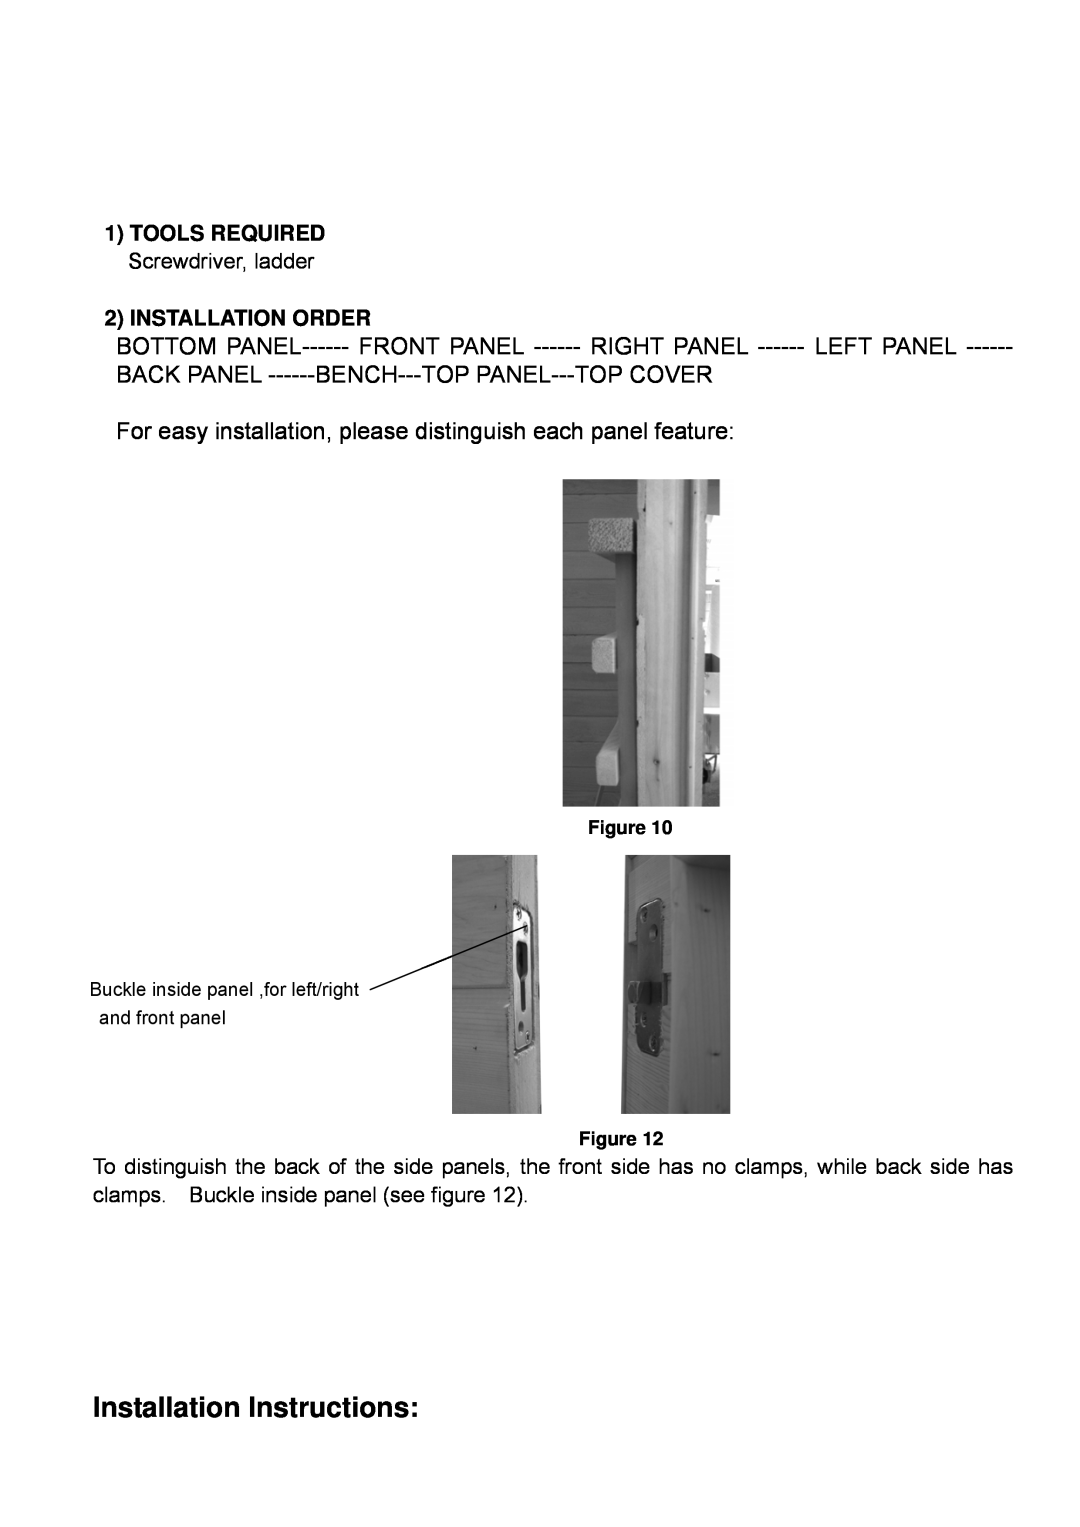 Keys Fitness BS-9101 Installation Instructions, Front Panel, Right Panel, Left Panel, Back Panel, Bench---Top Panel 